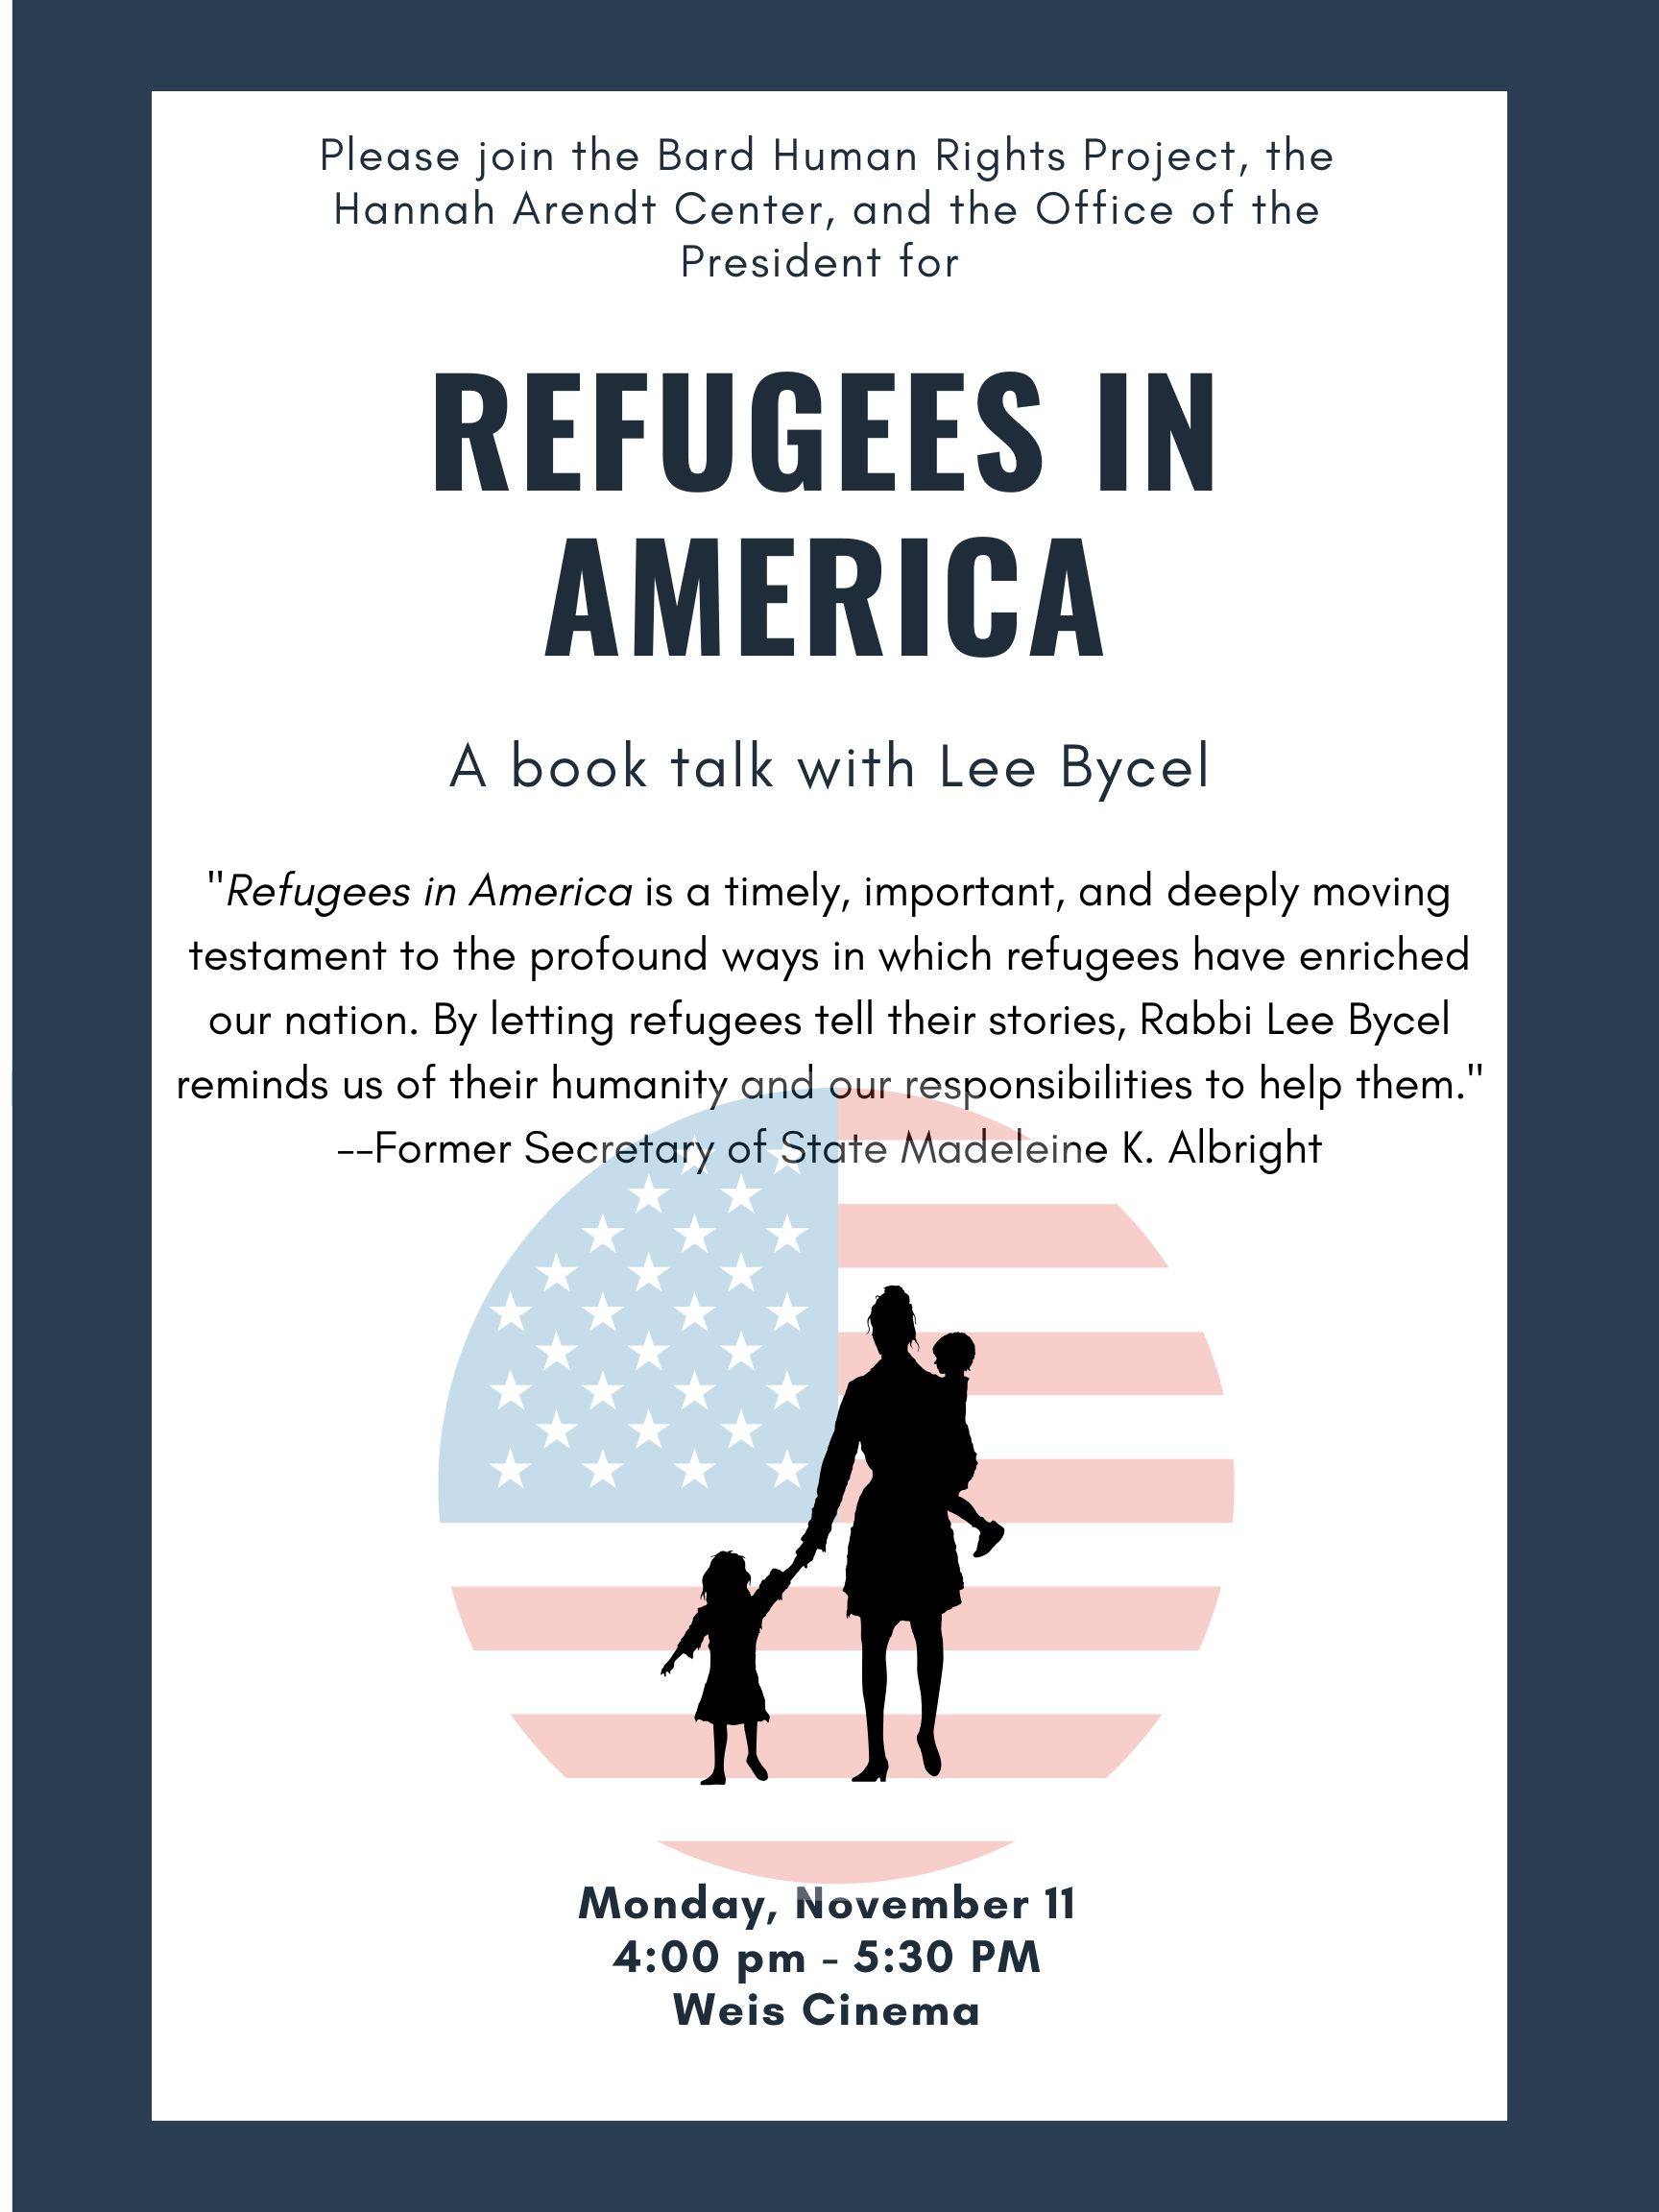 Refugees in America, a book talk&nbsp;by Rabbi Lee Bycel